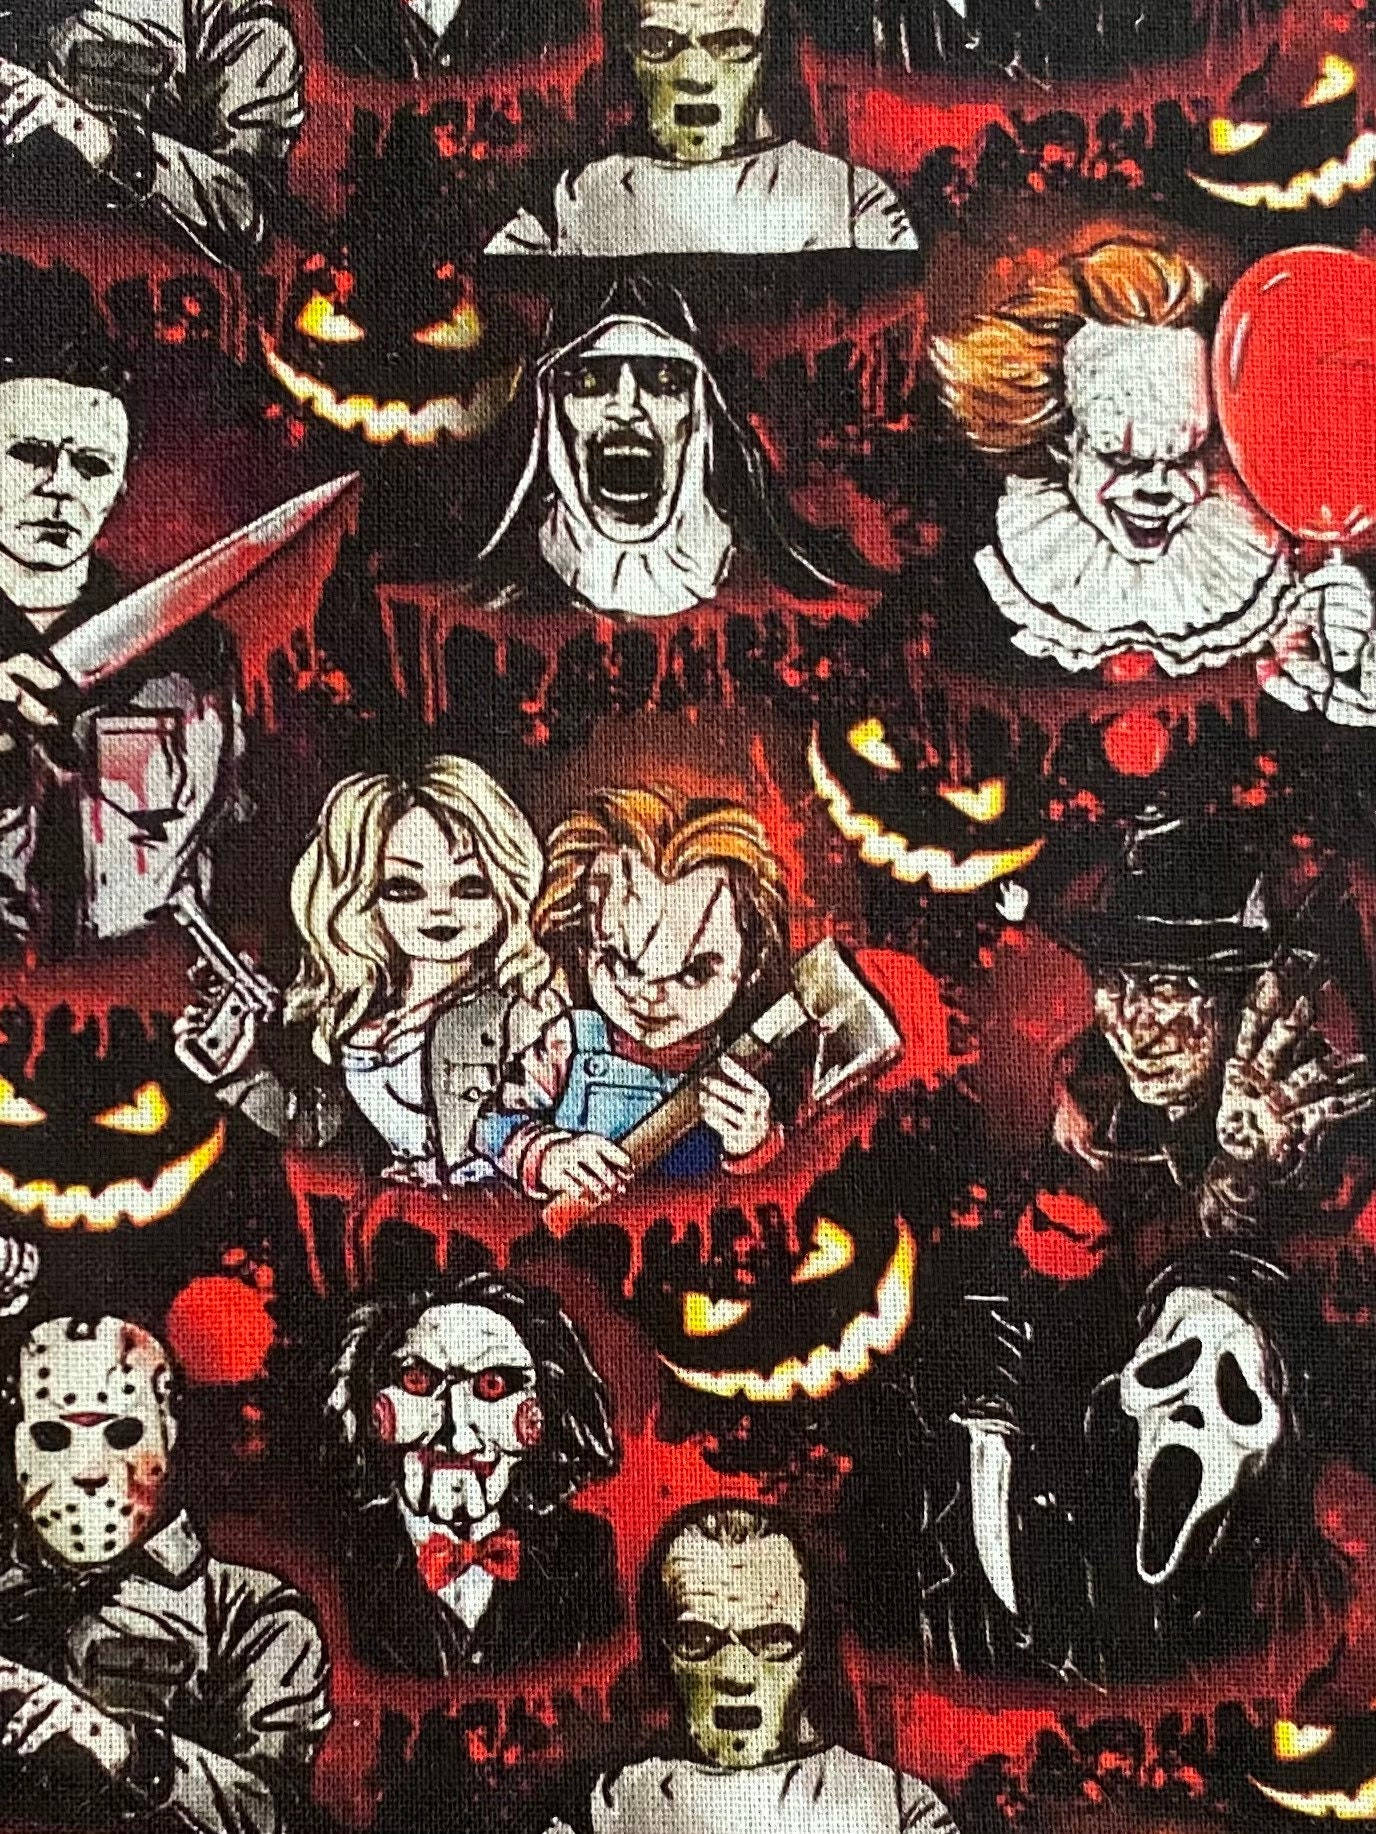 A Classic Horror Movie Collage. Wallpaper